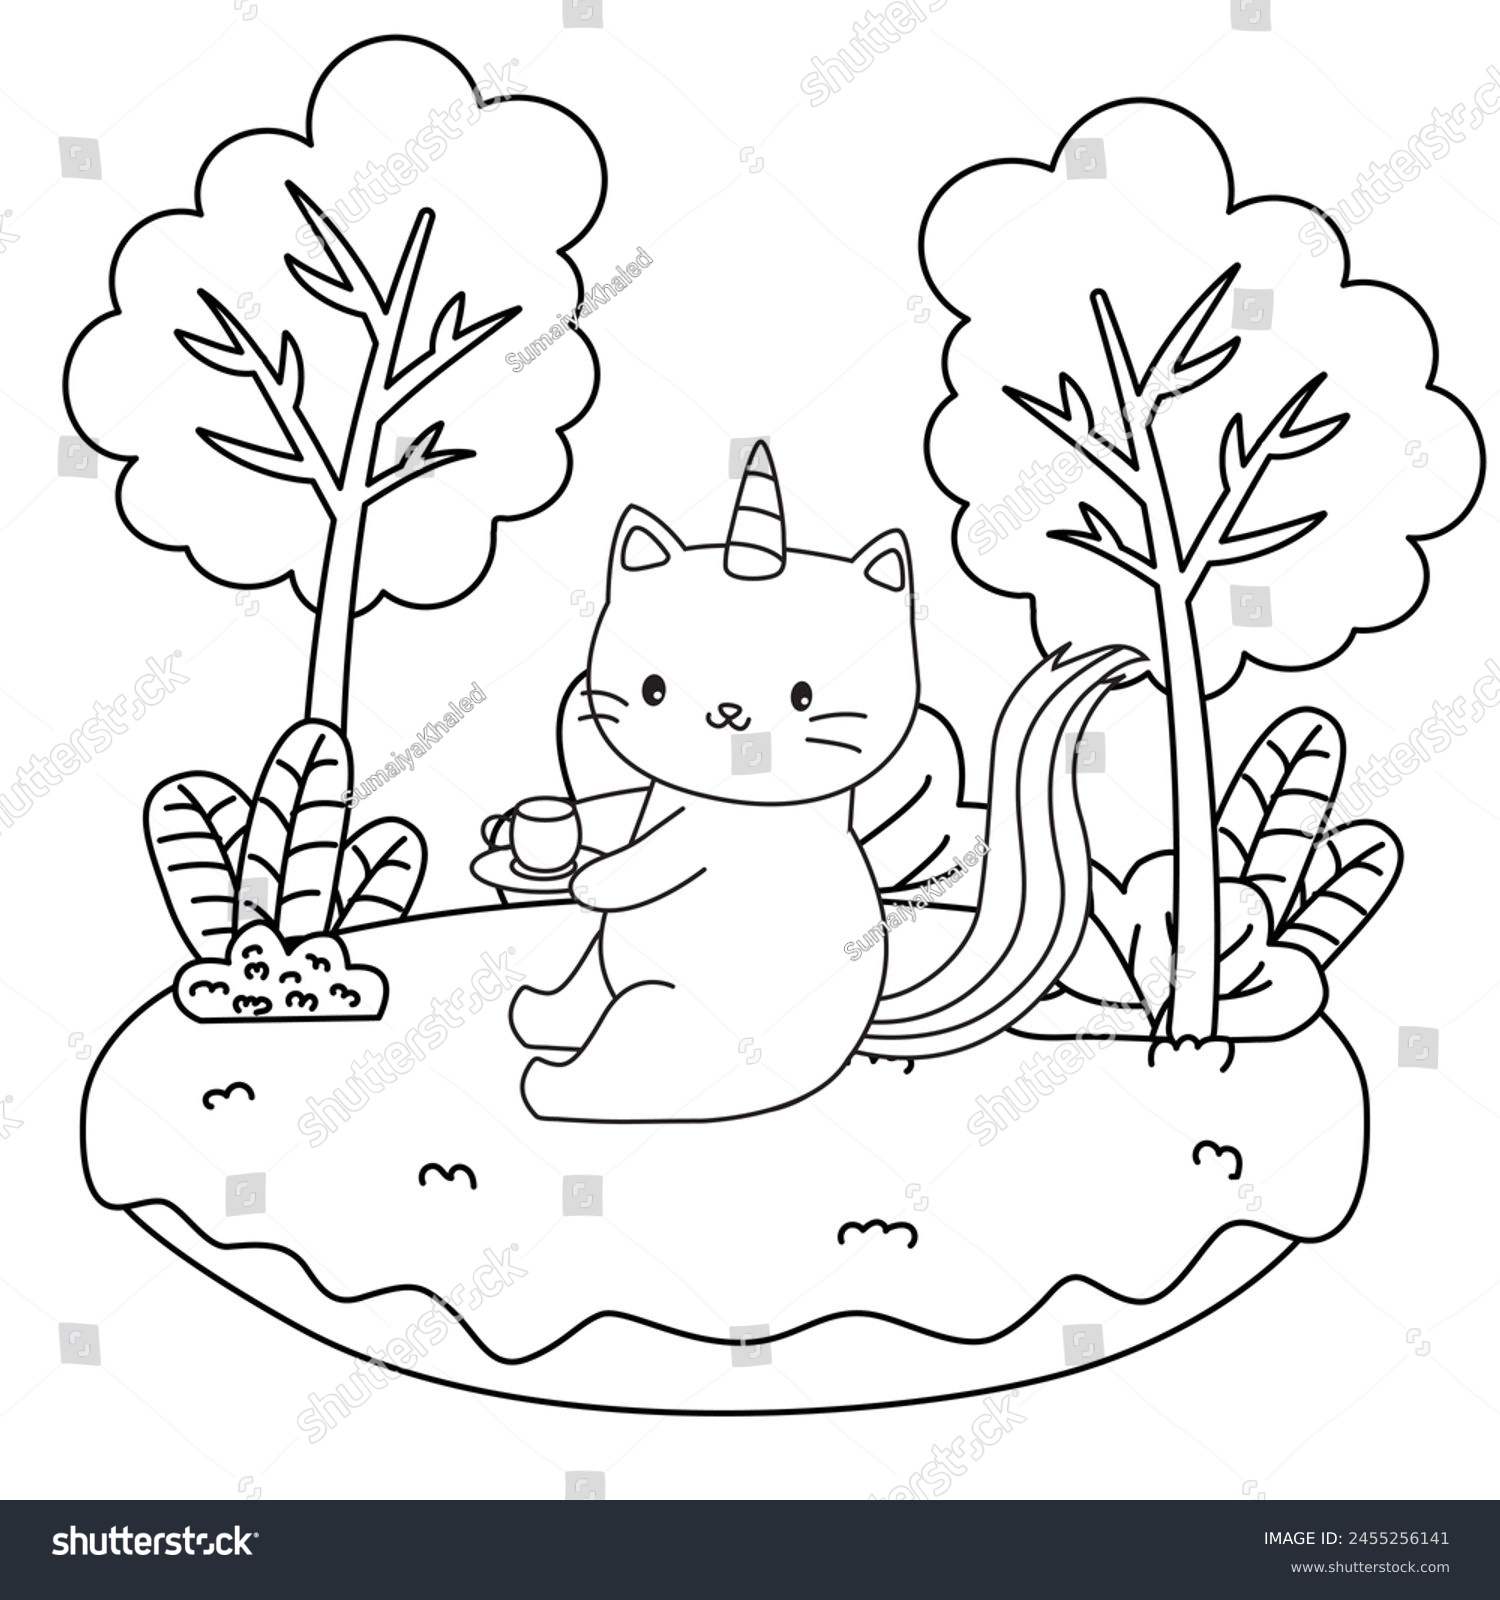 SVG of HD printable caticorn and cat unicorn or anime cat coloring pages for children kids and adults. Children coloring pages, caticorn coloring pages, learning for kids. Cat Vector
 svg